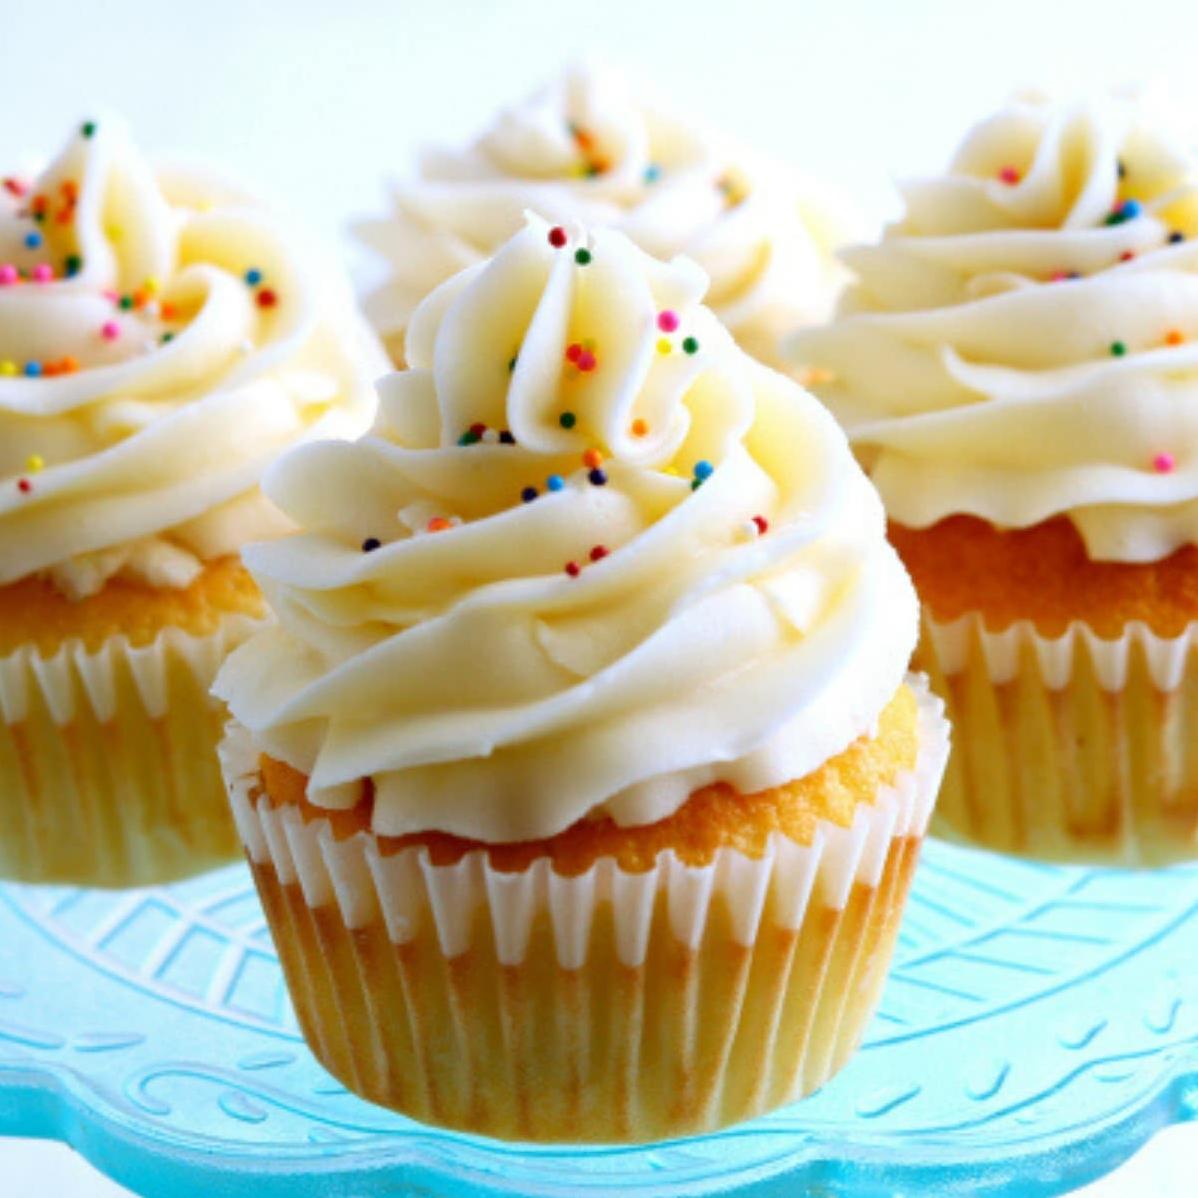  These gluten-free cupcakes are sweet little bites of heaven!